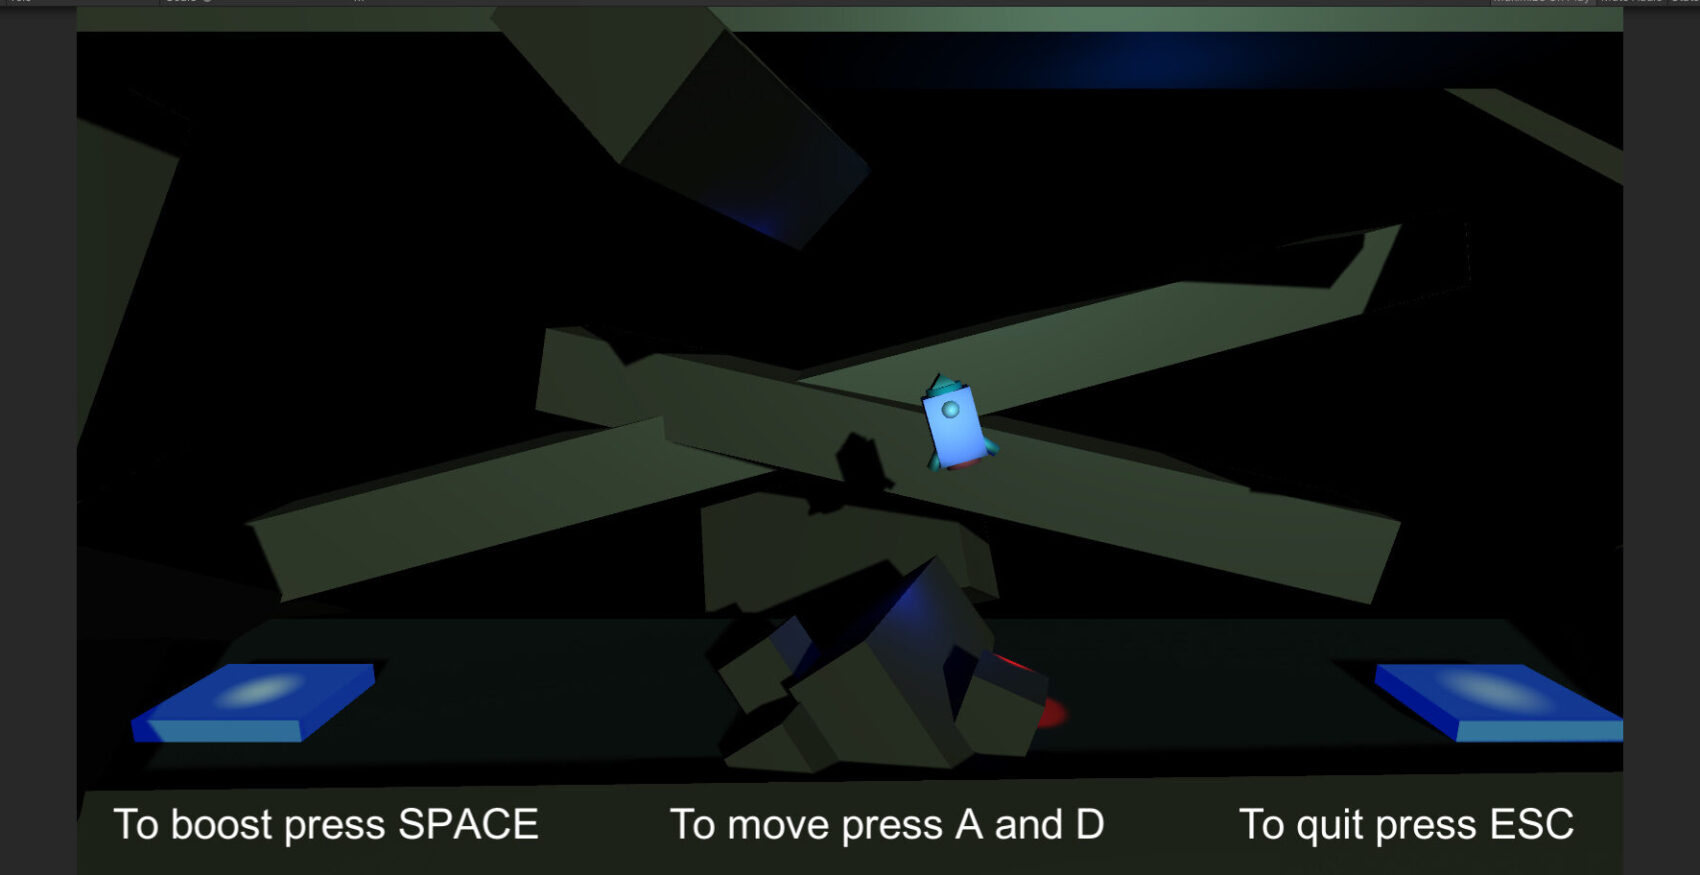 A prototype 2D obstacle avoiding game